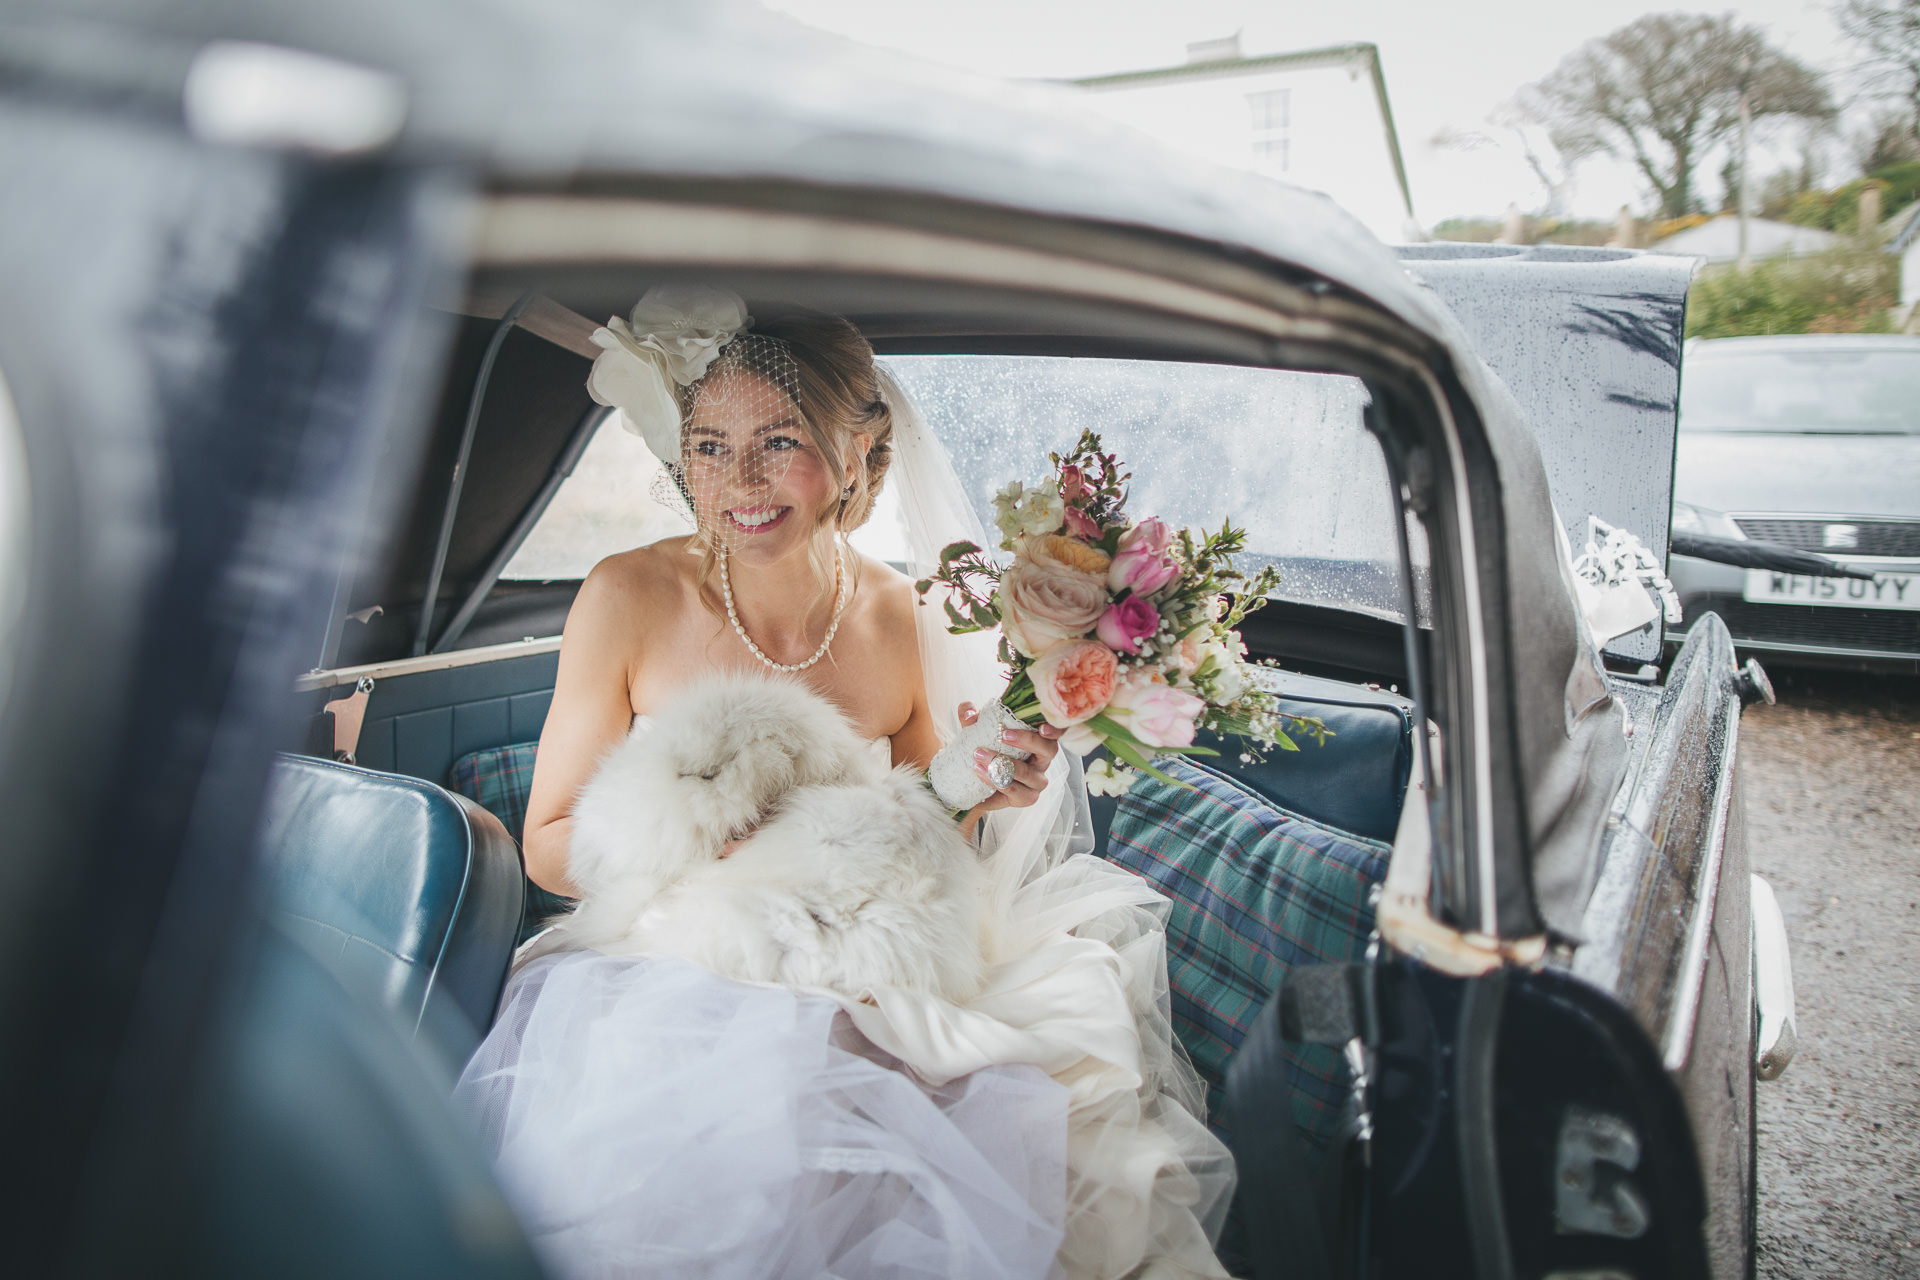 A bride arriving for her rainy day wedding, smiling in the wedding car. 